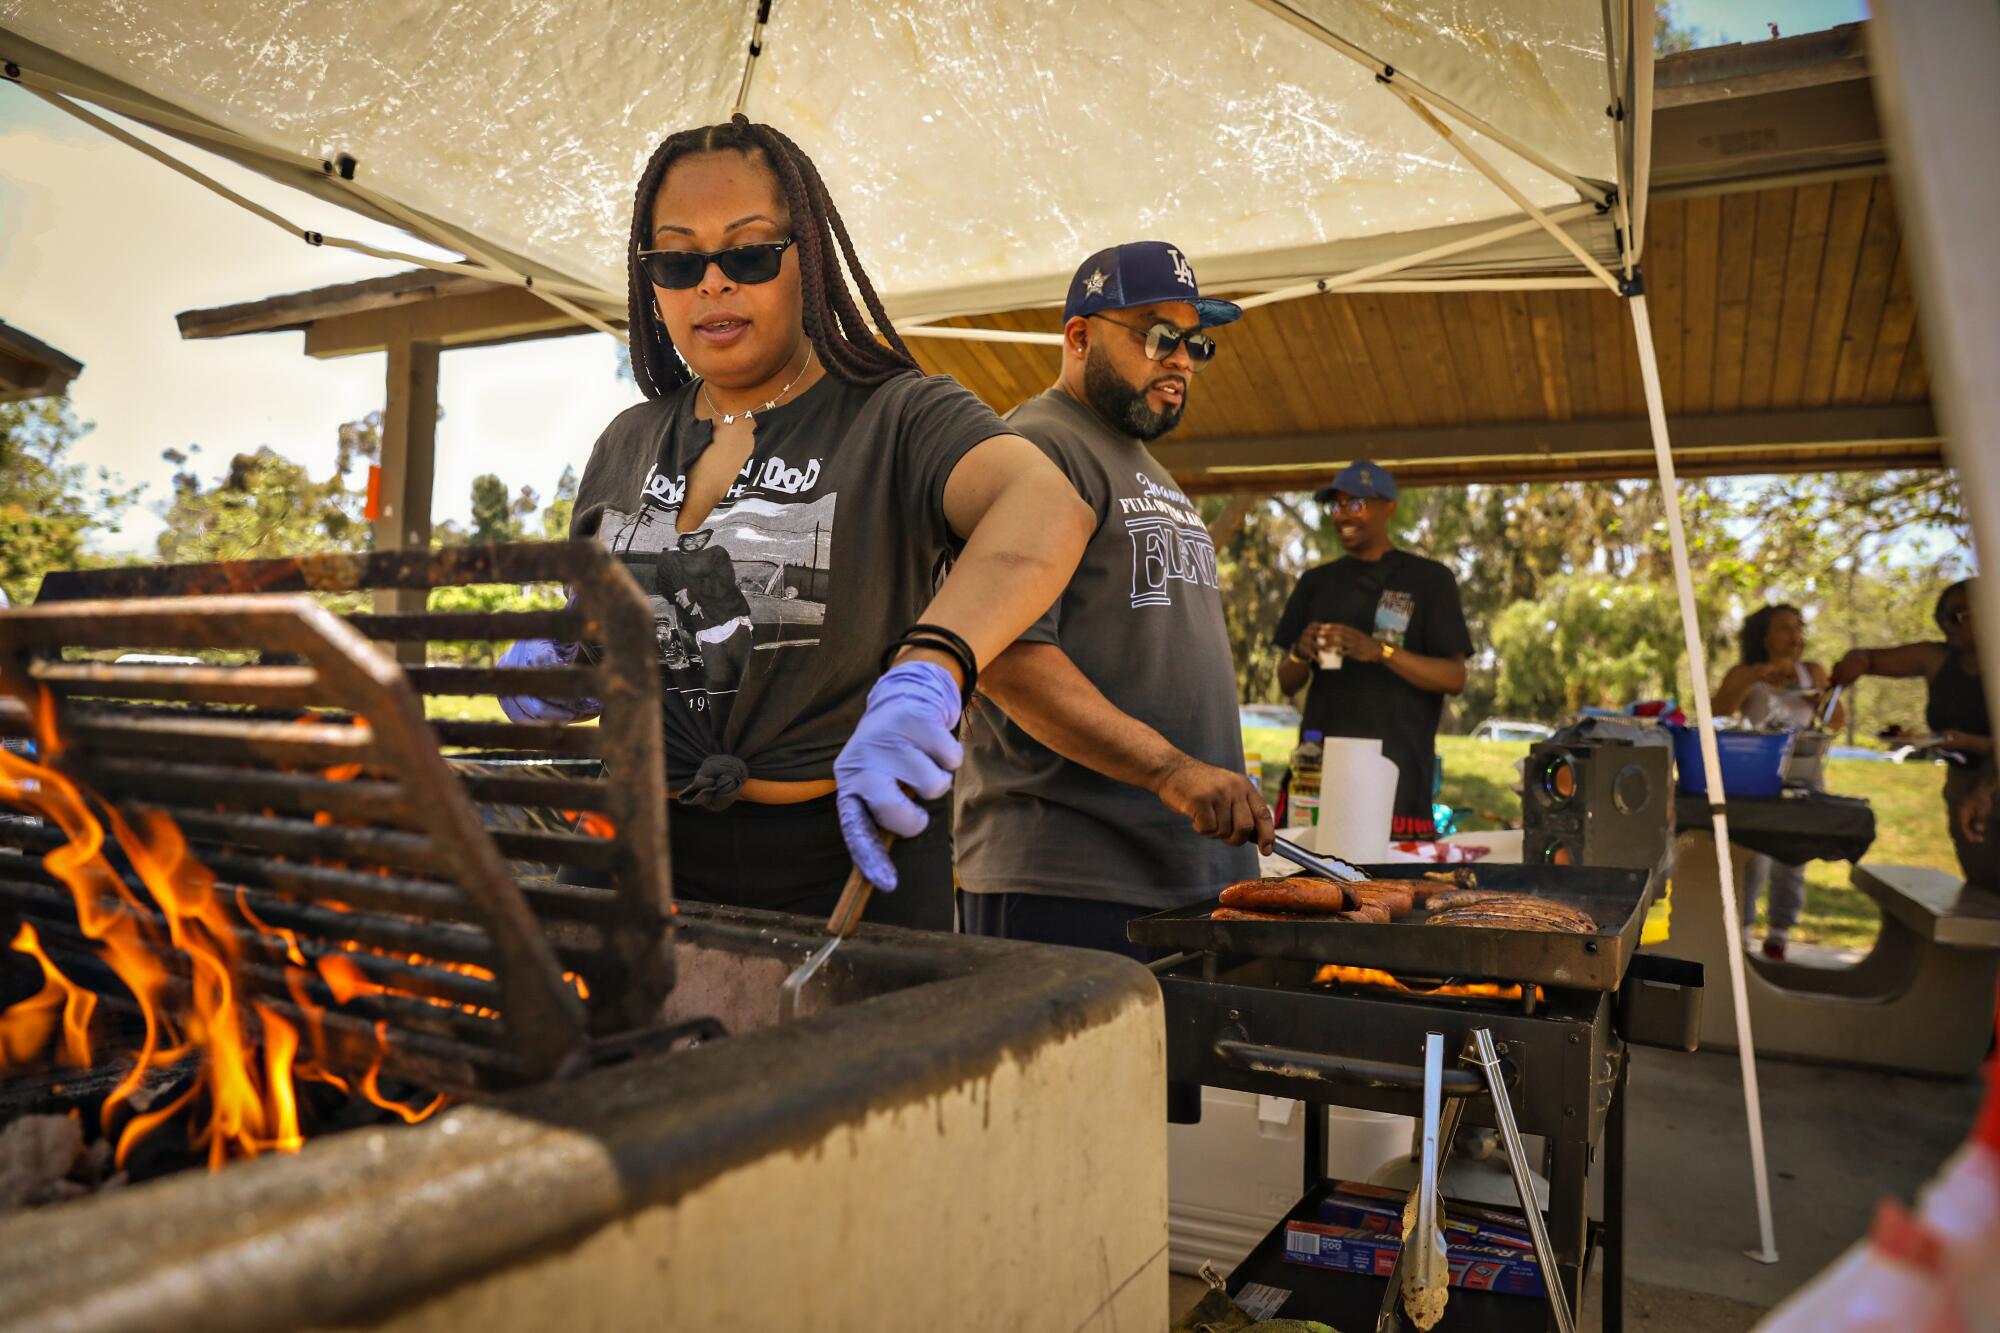 A woman and a man grill meat under a canopy.